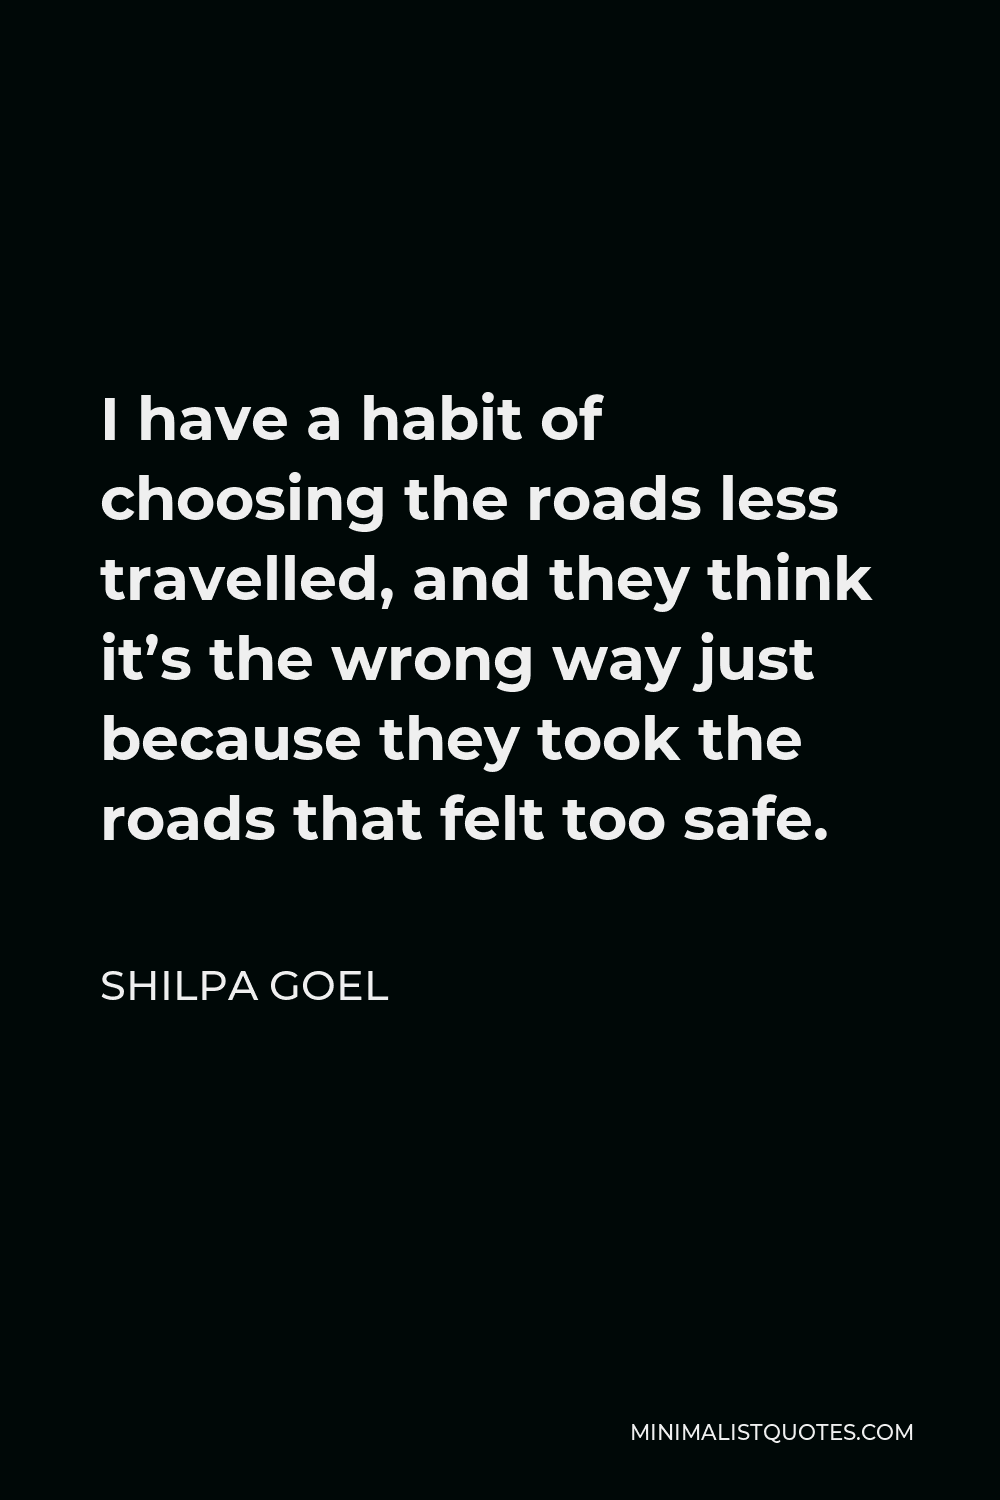 Shilpa Goel Quote - I have a habit of choosing the roads less travelled, and they think it’s the wrong way just because they took the roads that felt too safe.